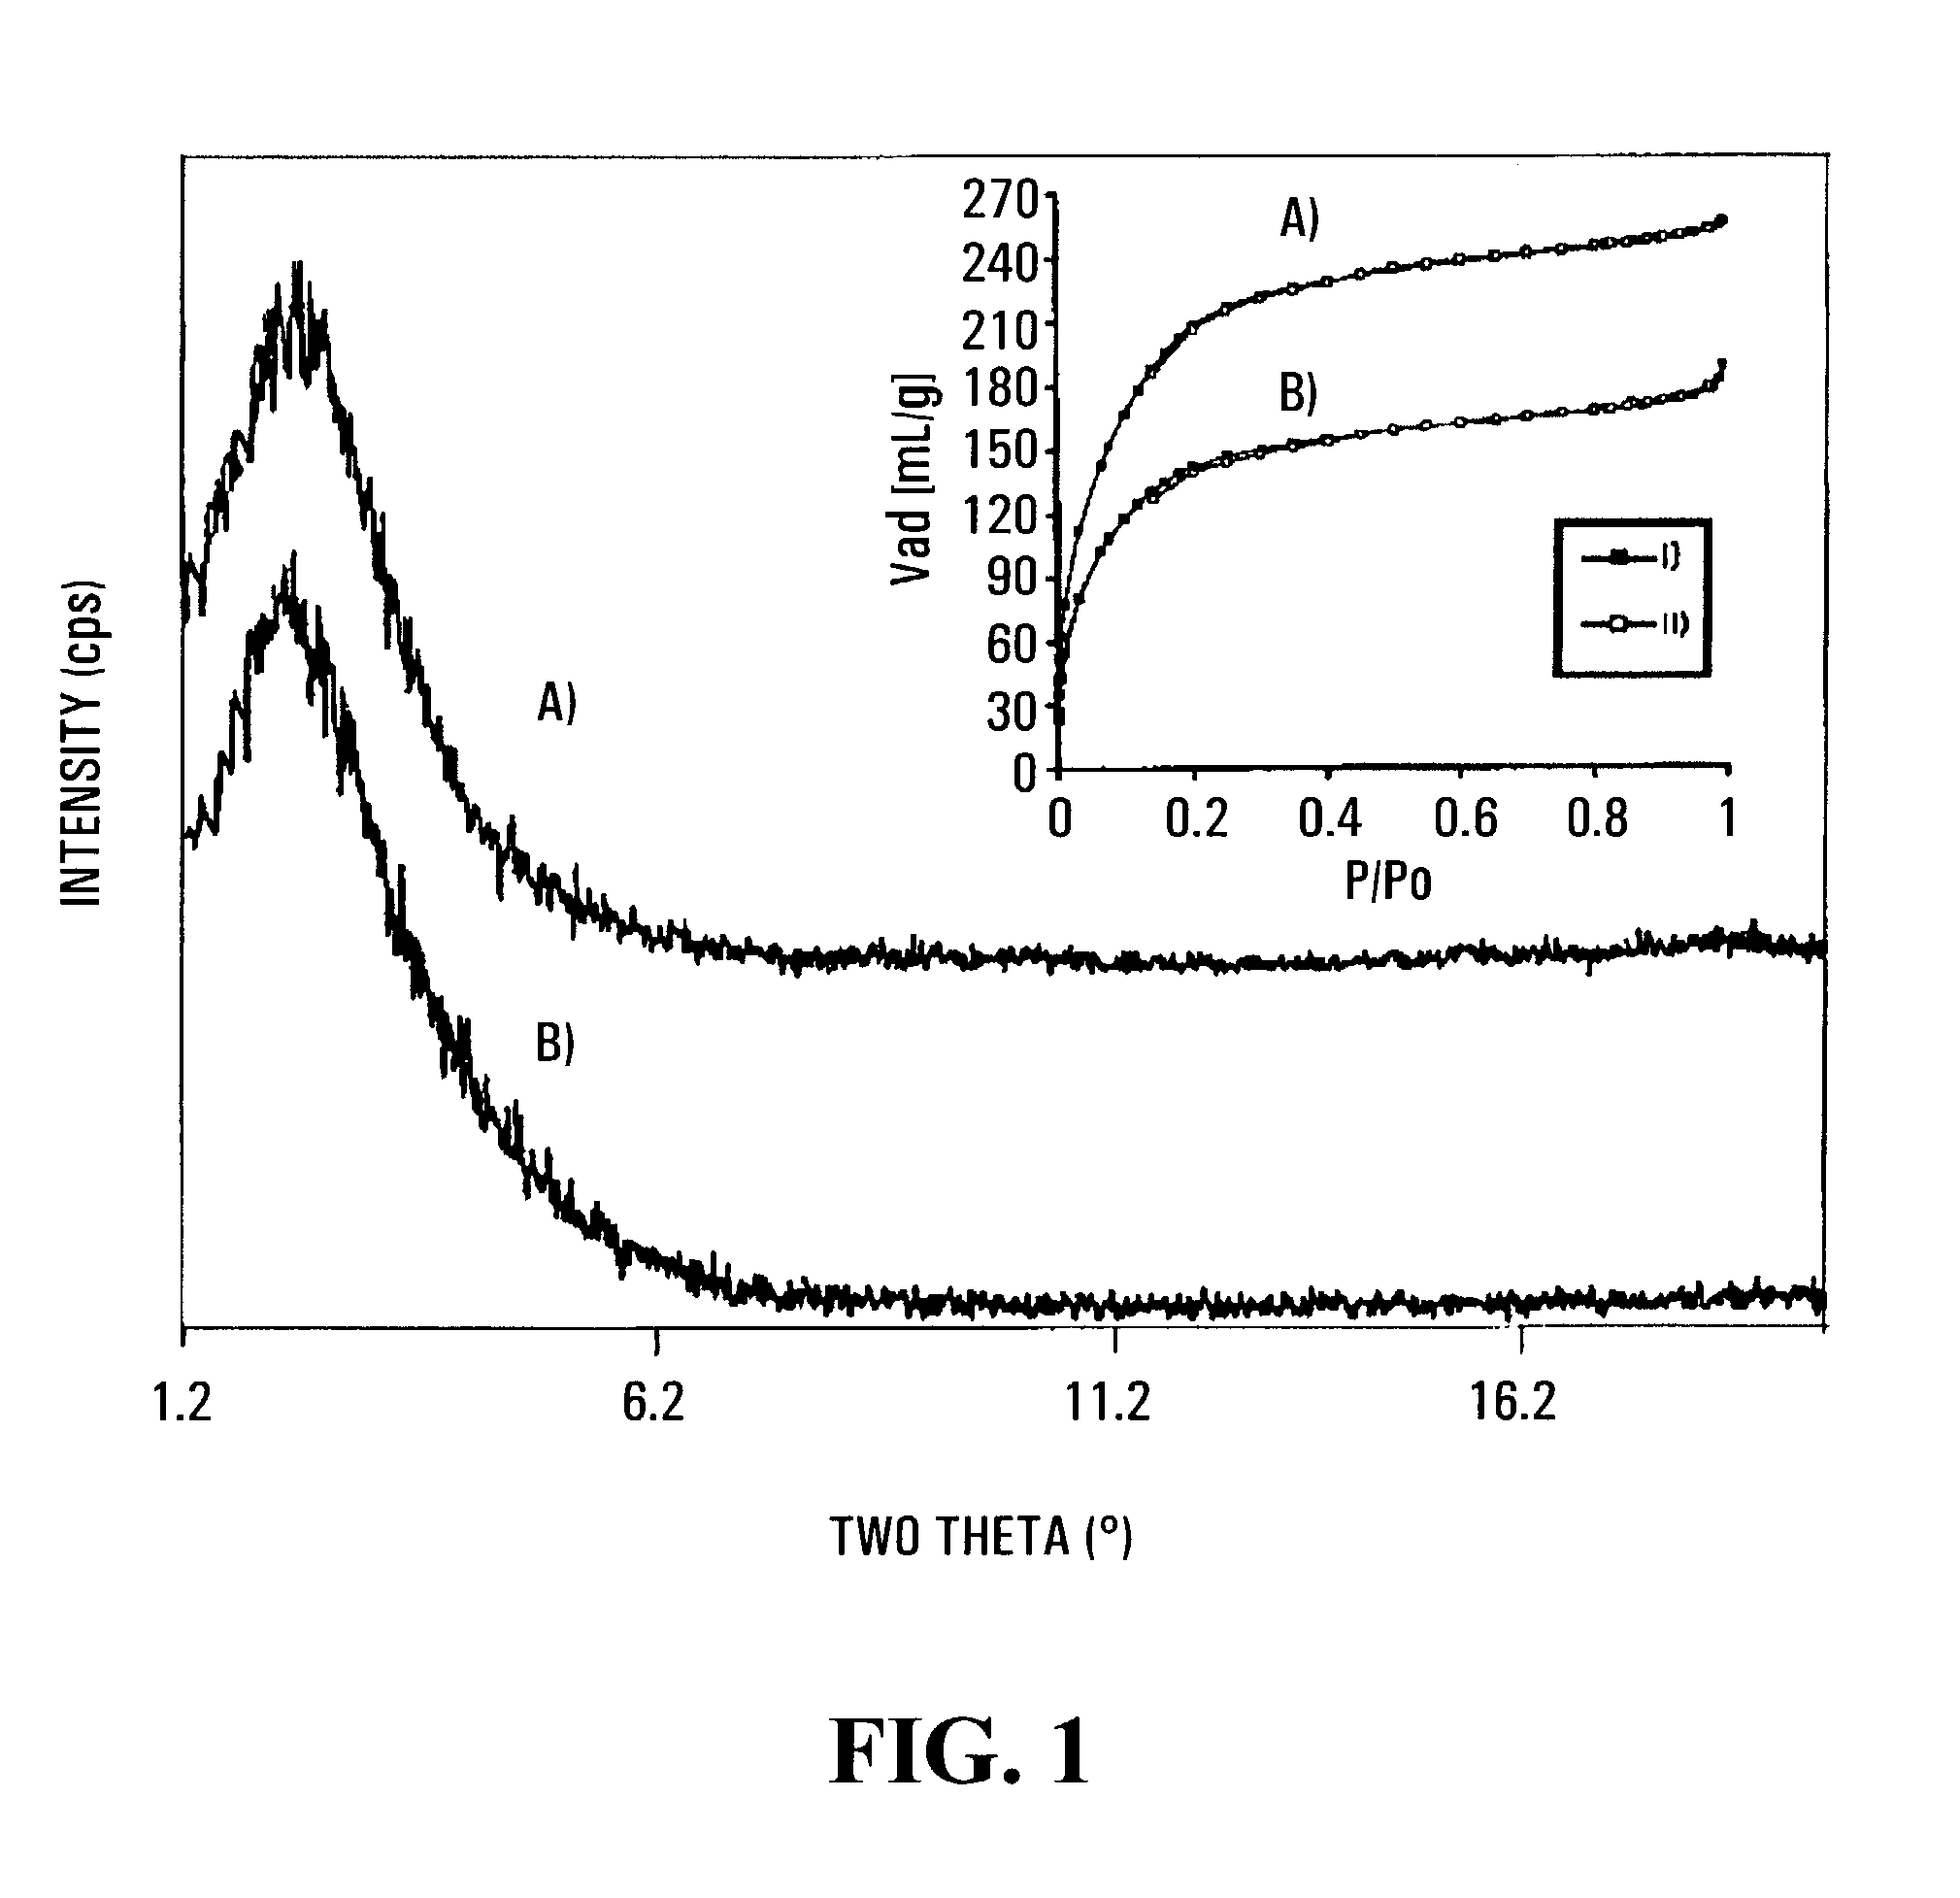 Metallic mesoporous transition metal oxide molecular sieves, room temperature activation of dinitrogen and ammonia production